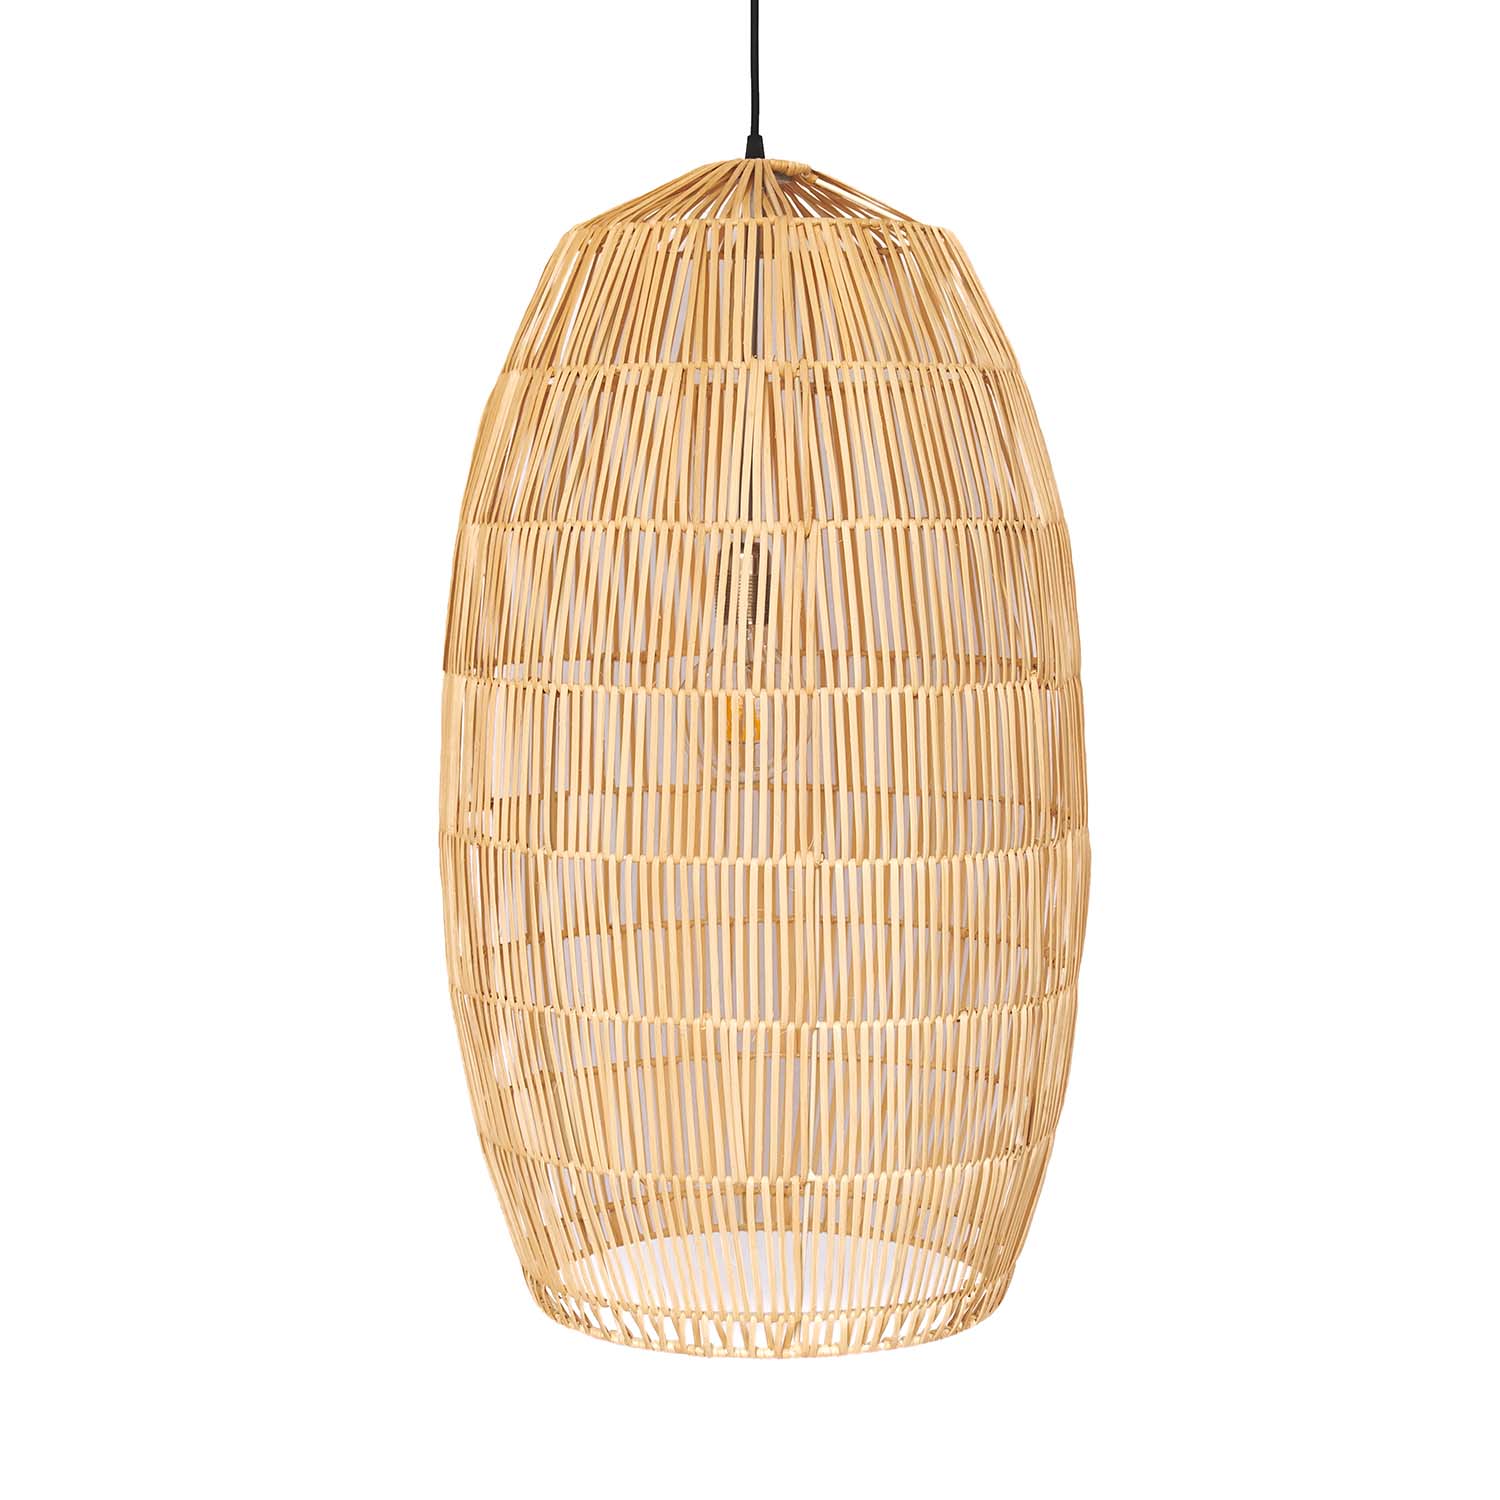 PICKLE SHORT - Round pendant light in natural or exotic black rattan